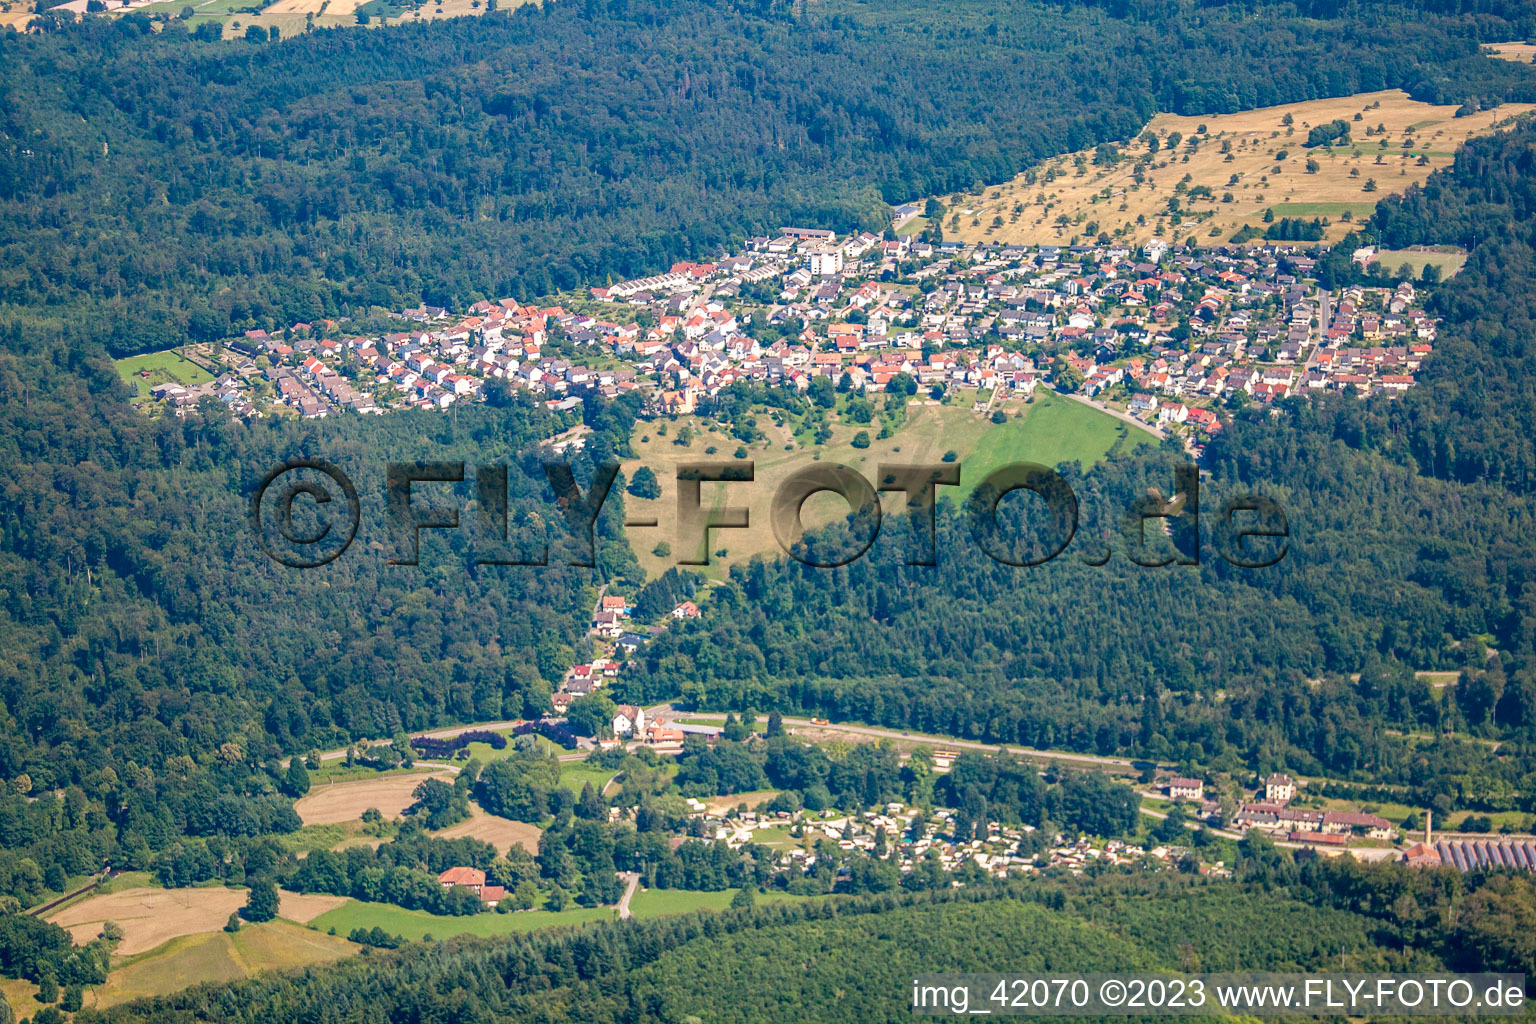 Aerial view of District Etzenrot in Waldbronn in the state Baden-Wuerttemberg, Germany